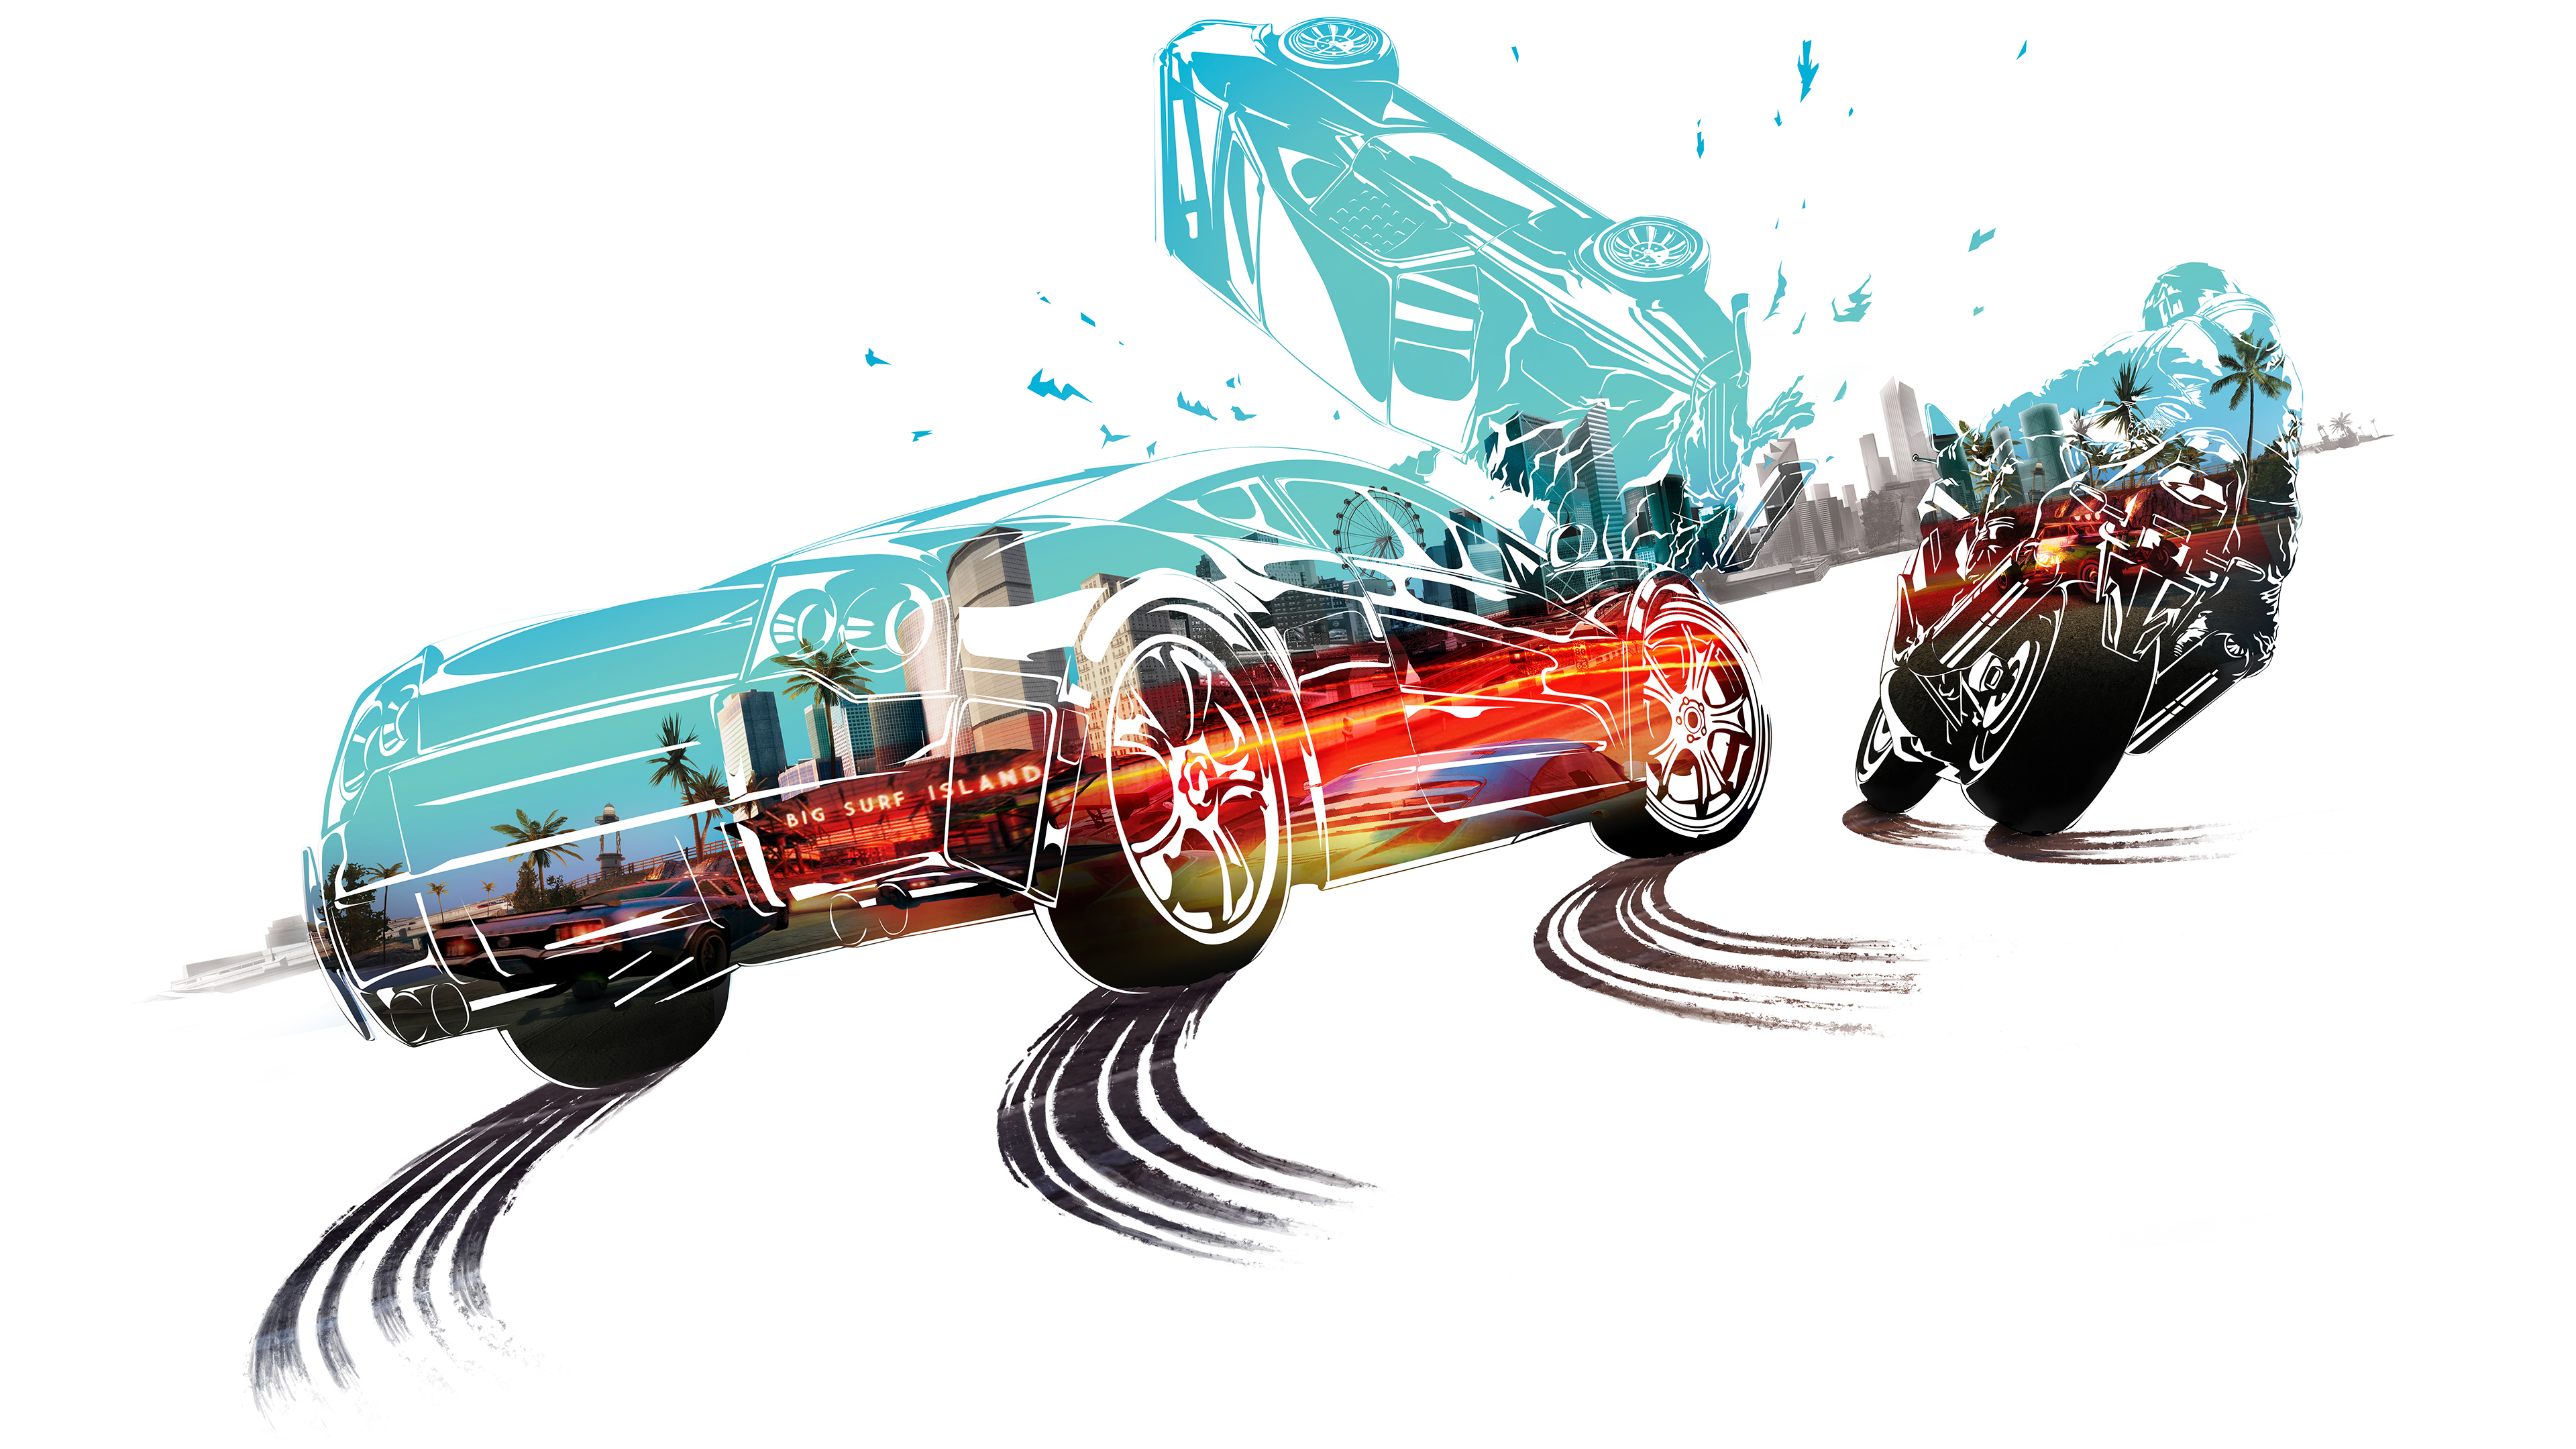 General 3840x2160 Burnout Paradise Electronic Arts simple background white background video game art tire tracks motorcycle EA Games video games cyan minimalism car rear view